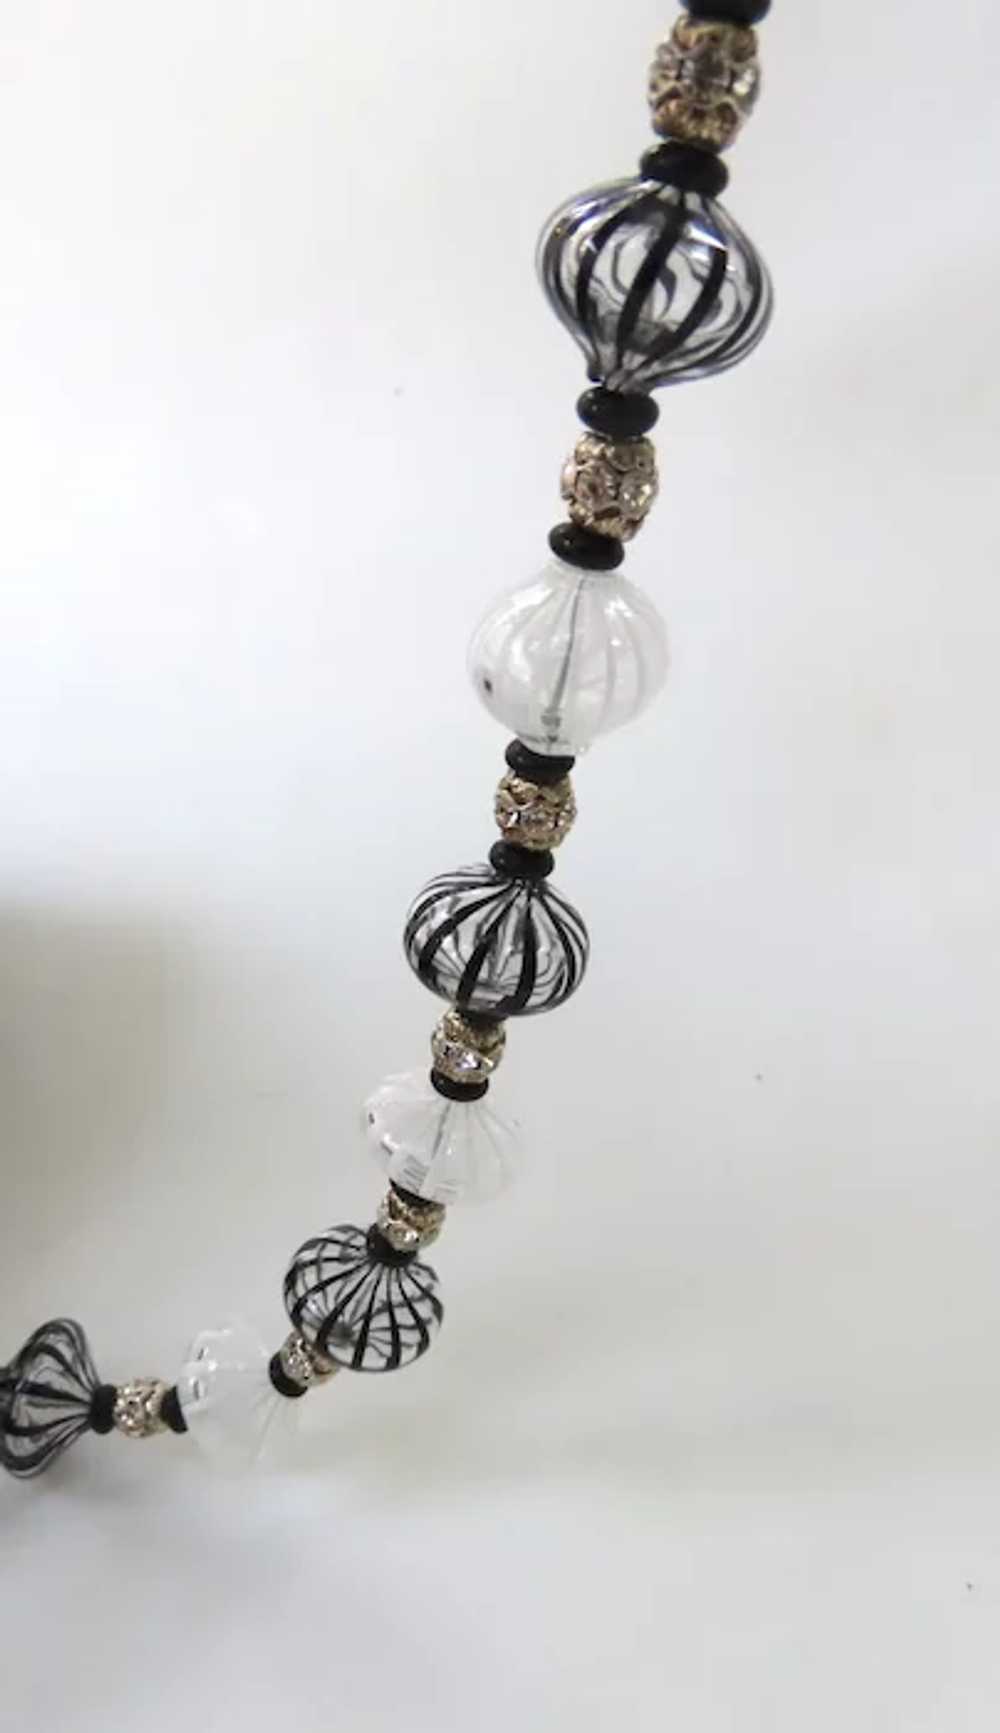 Vintage Murano Glass Bead Necklace Black White - image 6